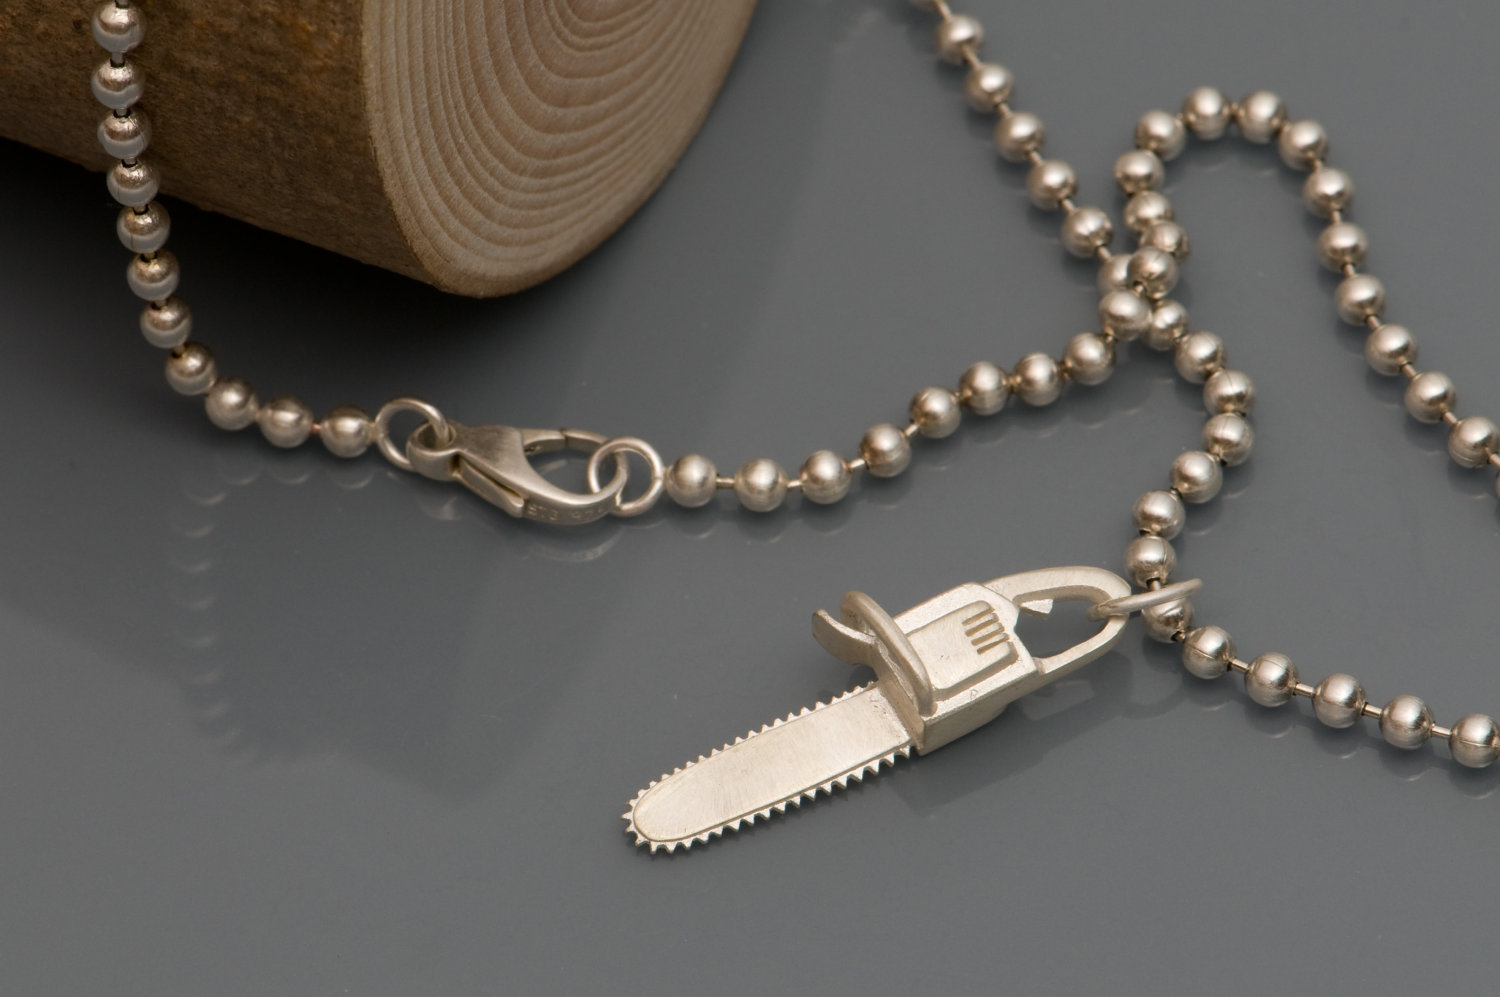 Chainsaw 'killer charm' pendant in solid silver, on a sterling silver ball chain necklace. 'Killer Charm' collection designed and handmade by William White.